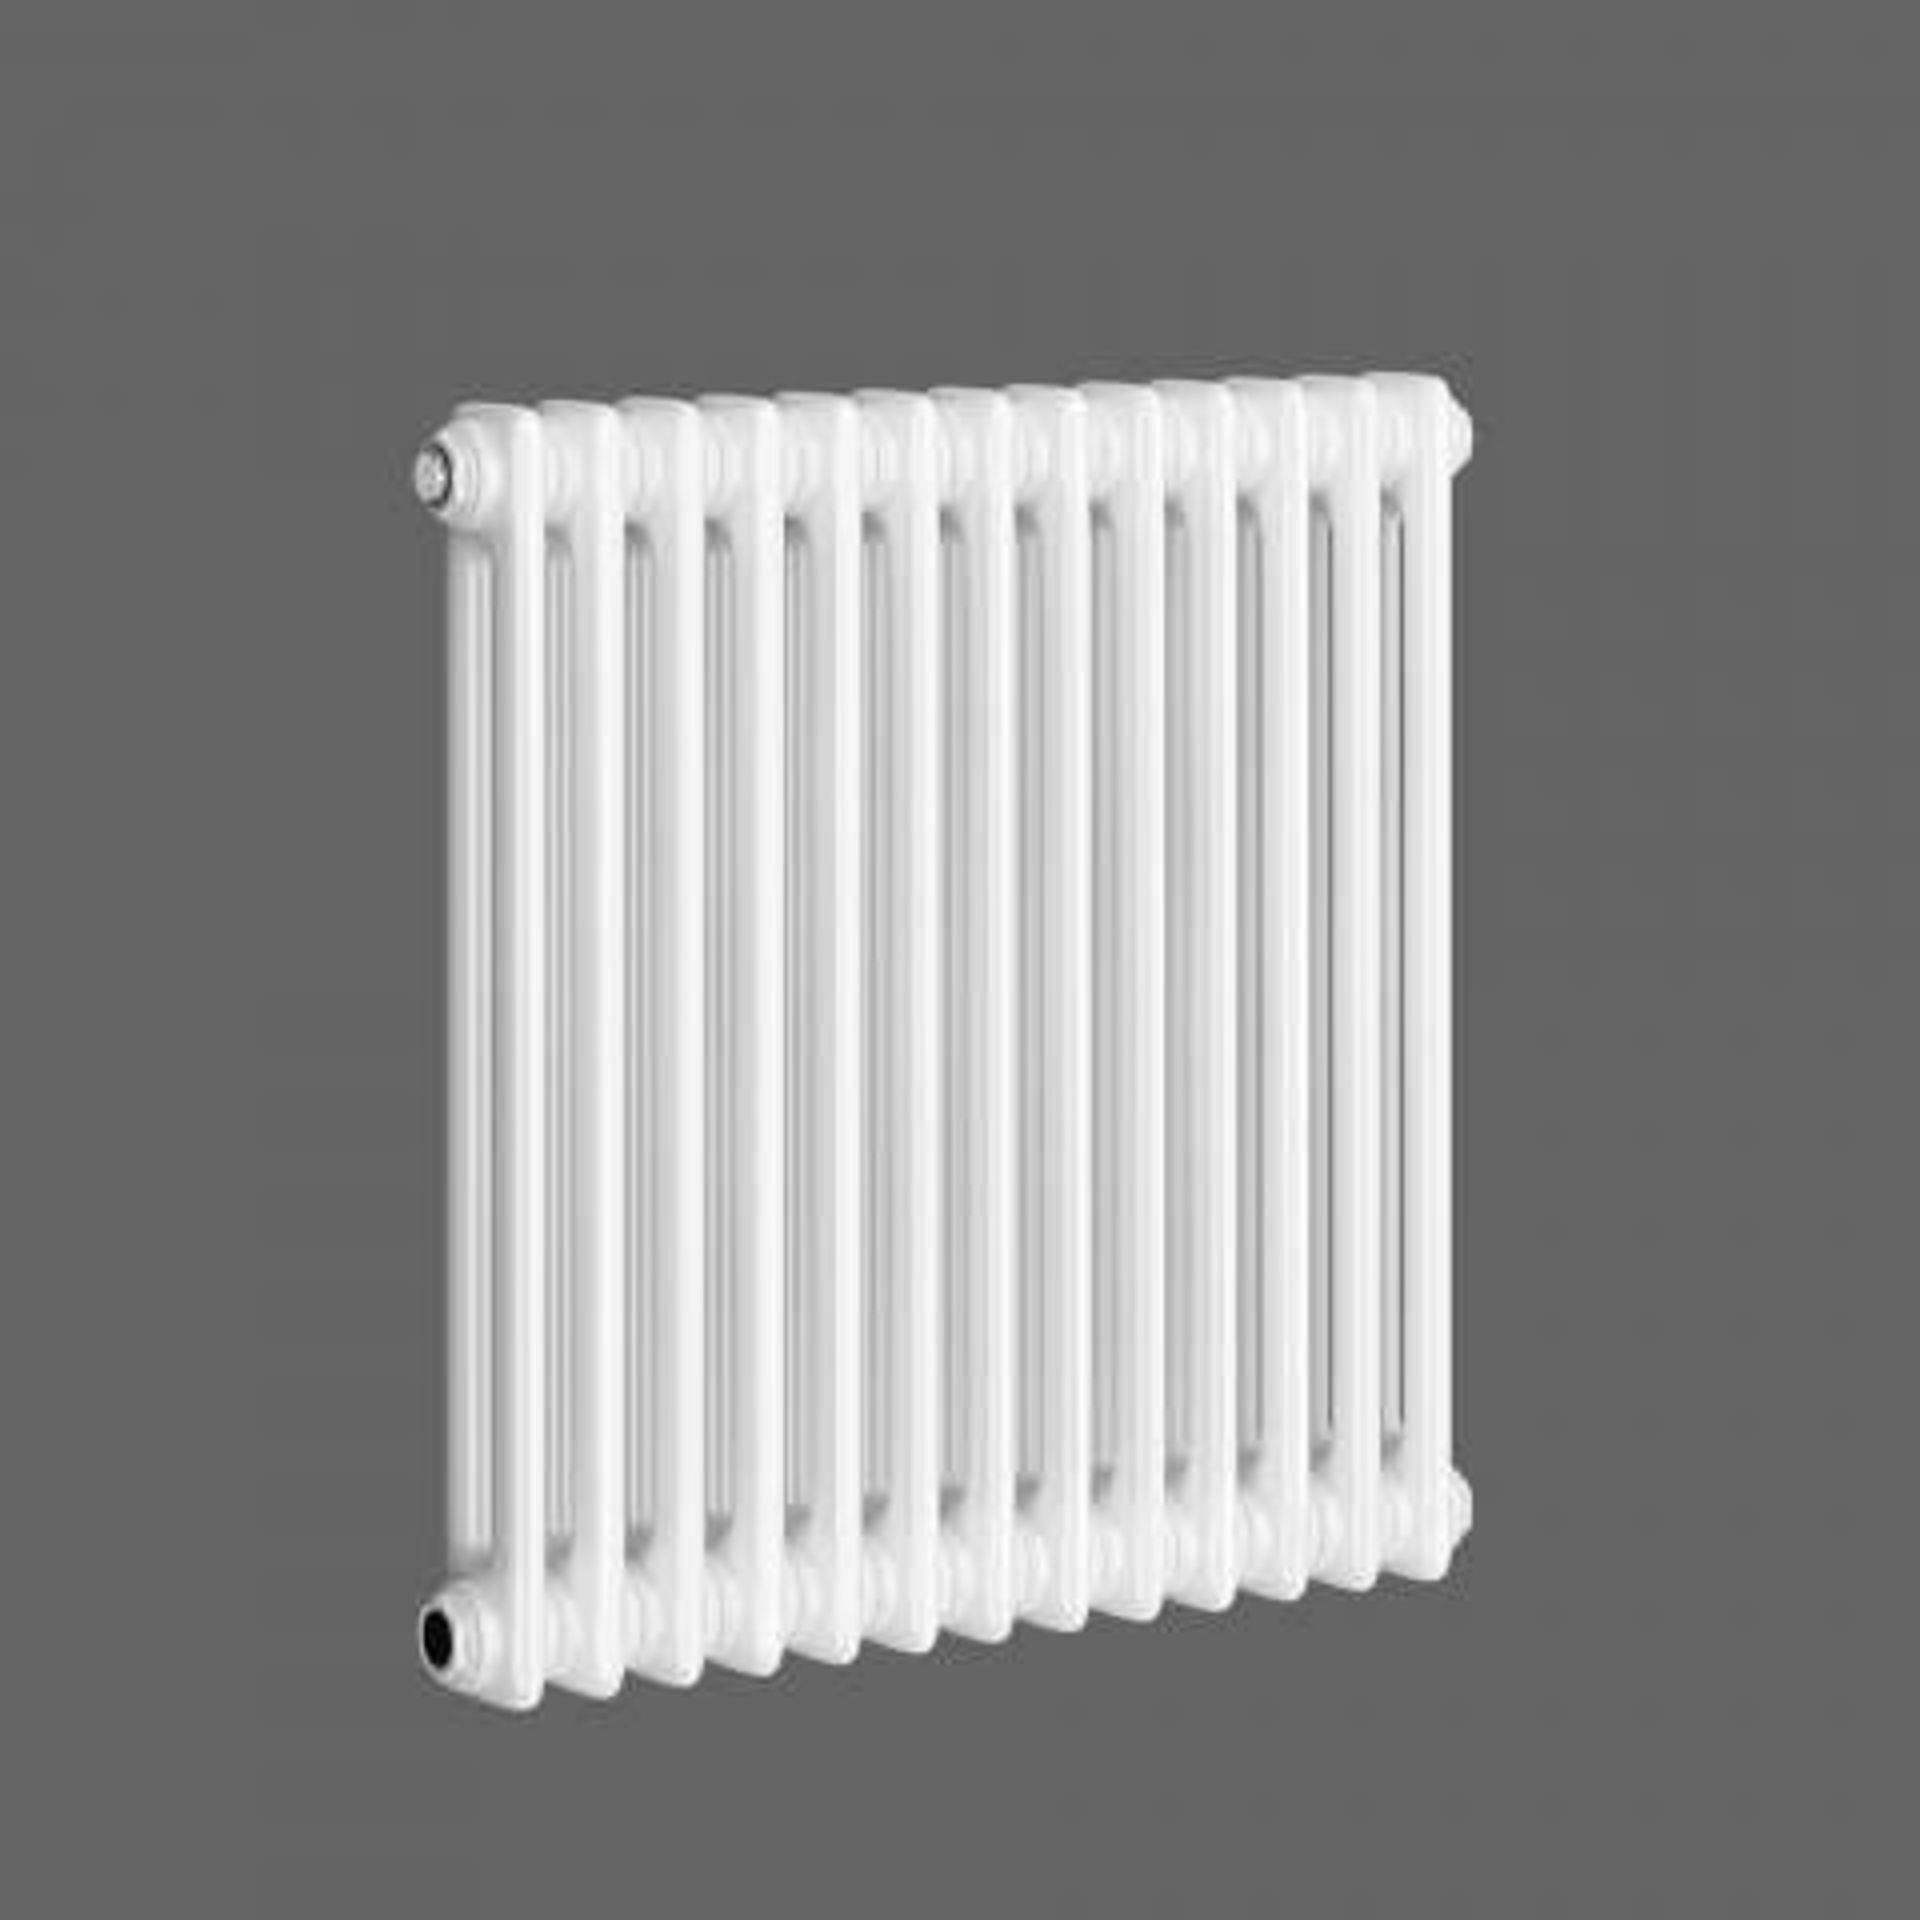 (J52) 600x603mm White Double Panel Horizontal Colosseum Traditional Radiator. RRP £307.99. Classic - Image 2 of 3